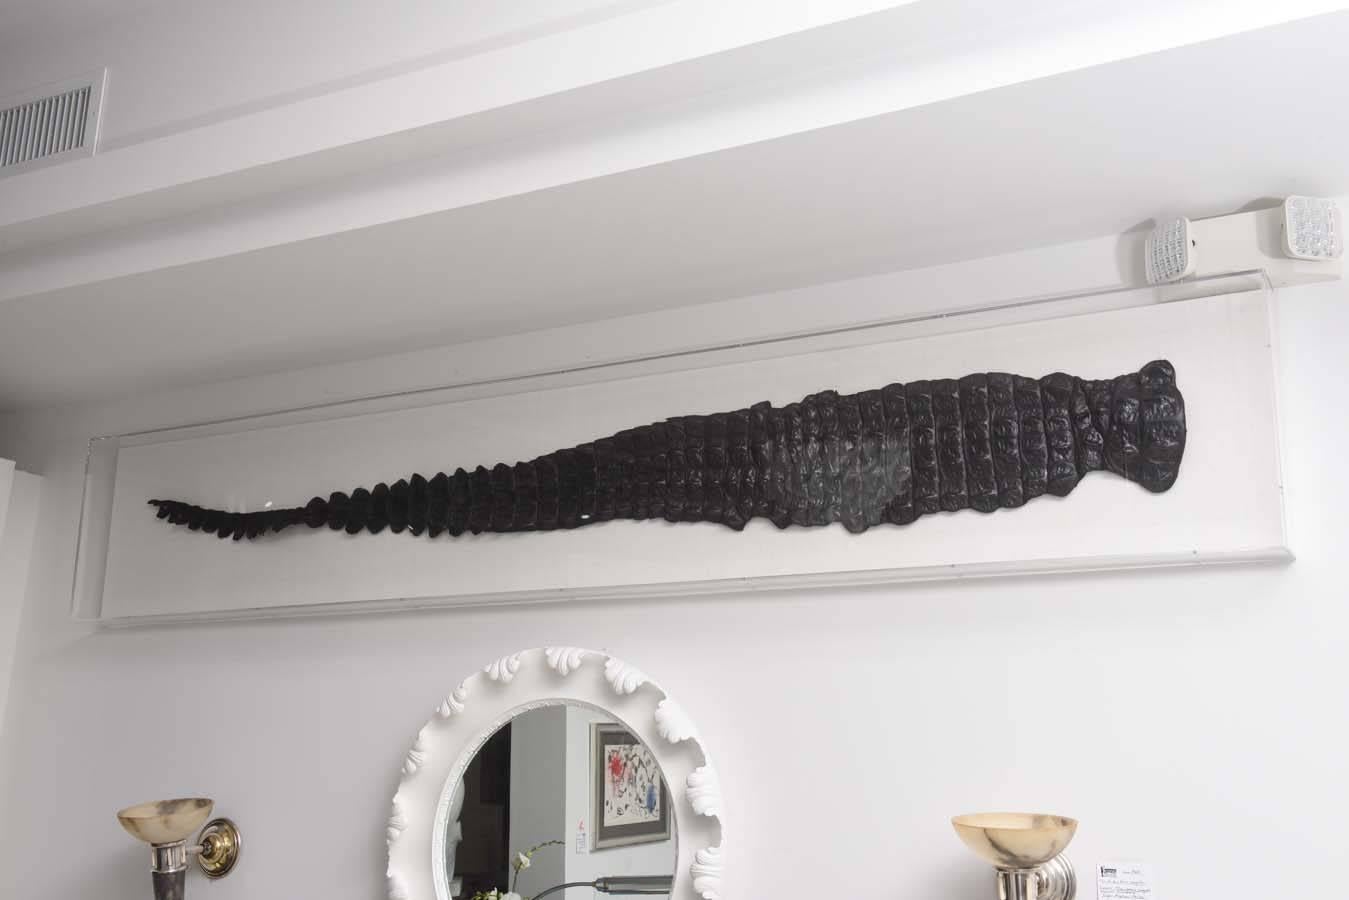 This exotic Egyptian Nile crocodile has been dyed black and mounted on a linen fabric with a Lucite box.

Note: Nile crocodiles are not on the endangered species list.

For best net trade price or additional questions regarding this item, please